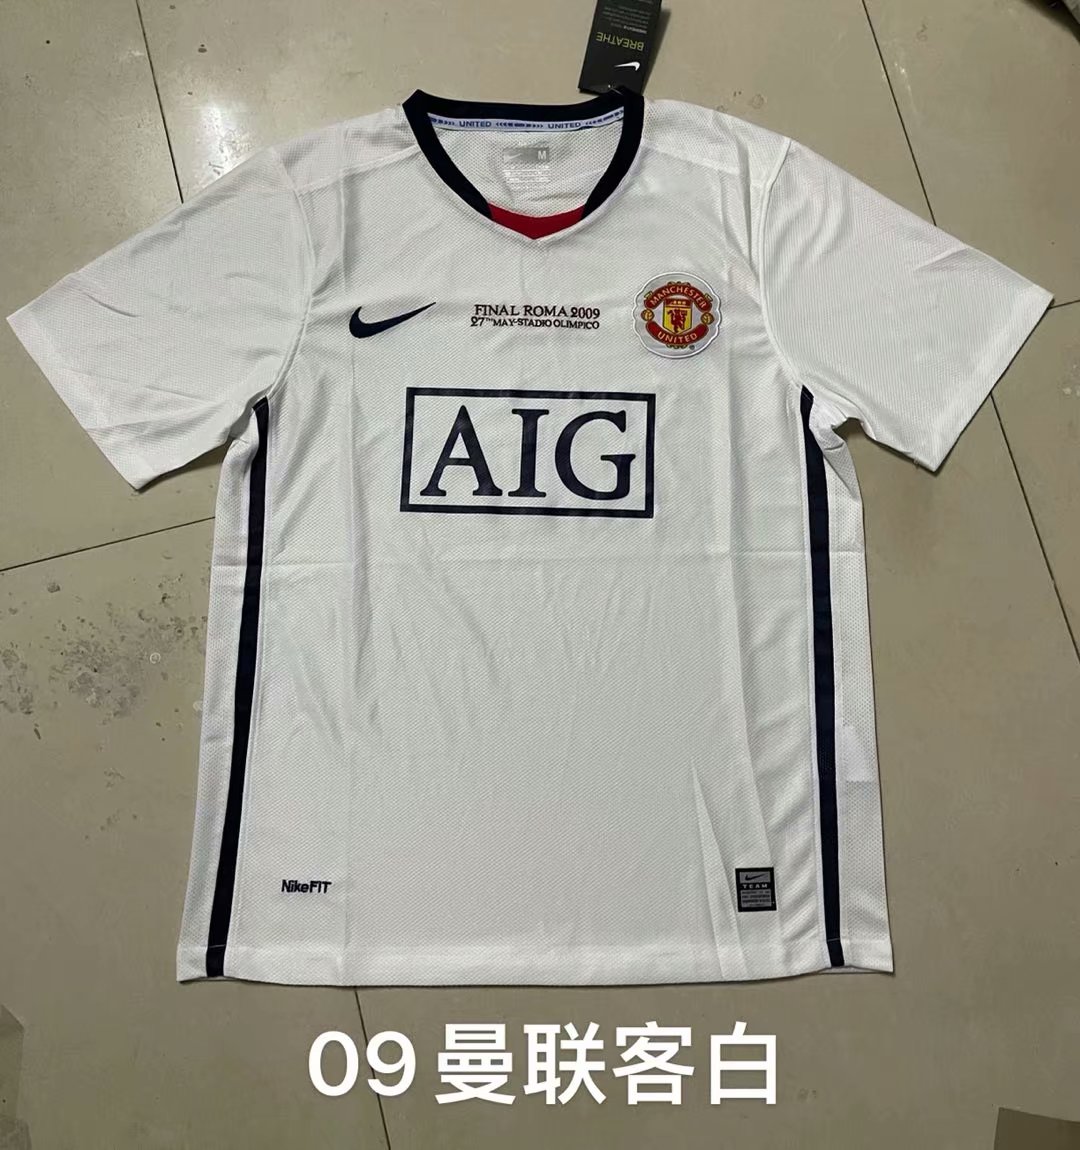 2008-2009 Manchester United away Retro Champions League version